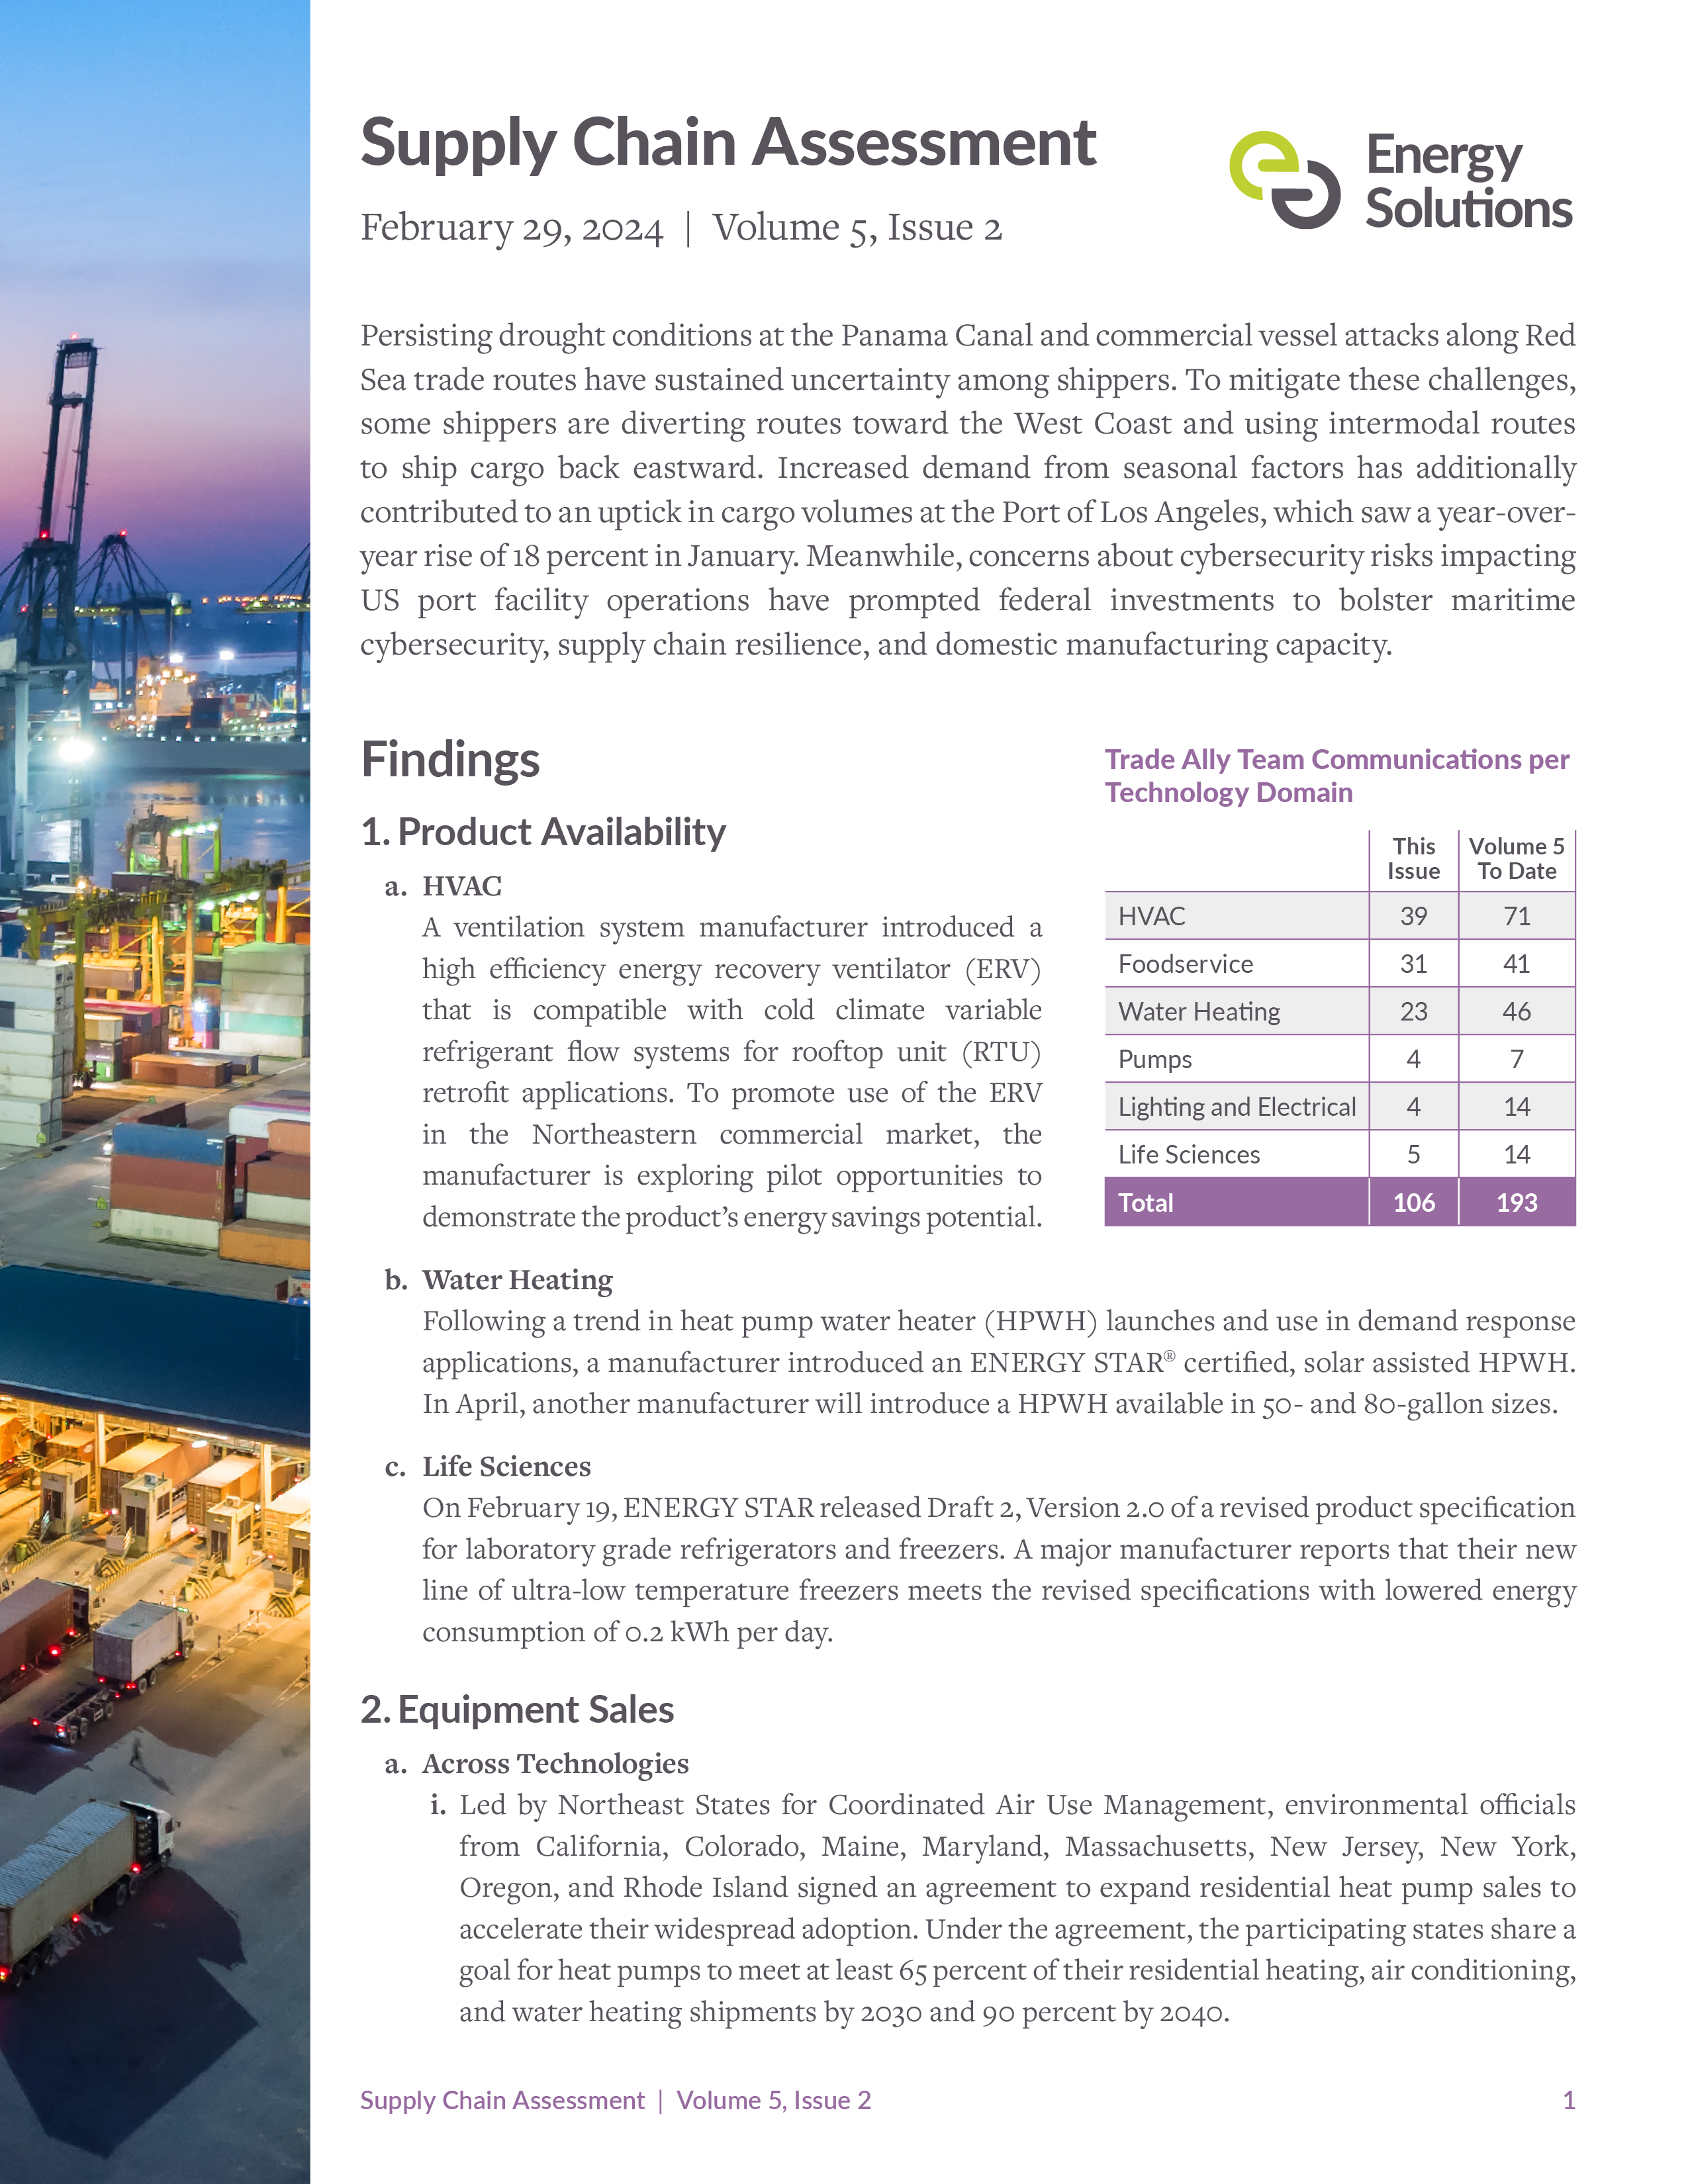 Supply Chain Assessment Vol 5 Issue 2